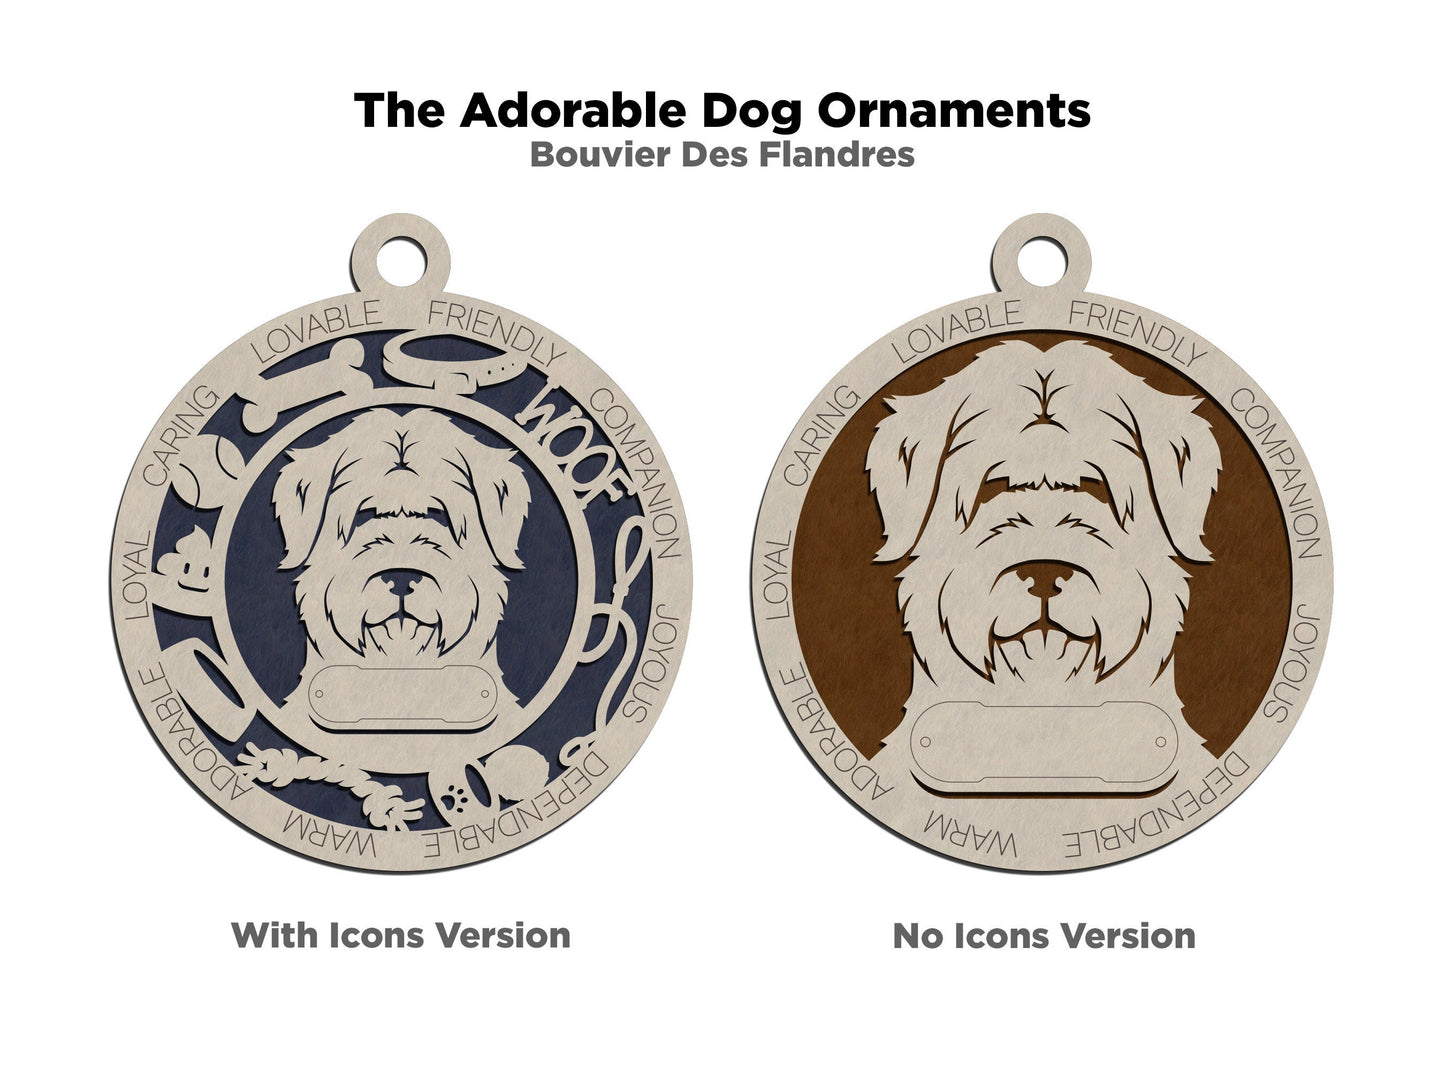 Bouvier Des Flandres - Adorable Dog Ornaments - 2 Ornaments included - SVG, PDF, AI File Download - Sized for Glowforge